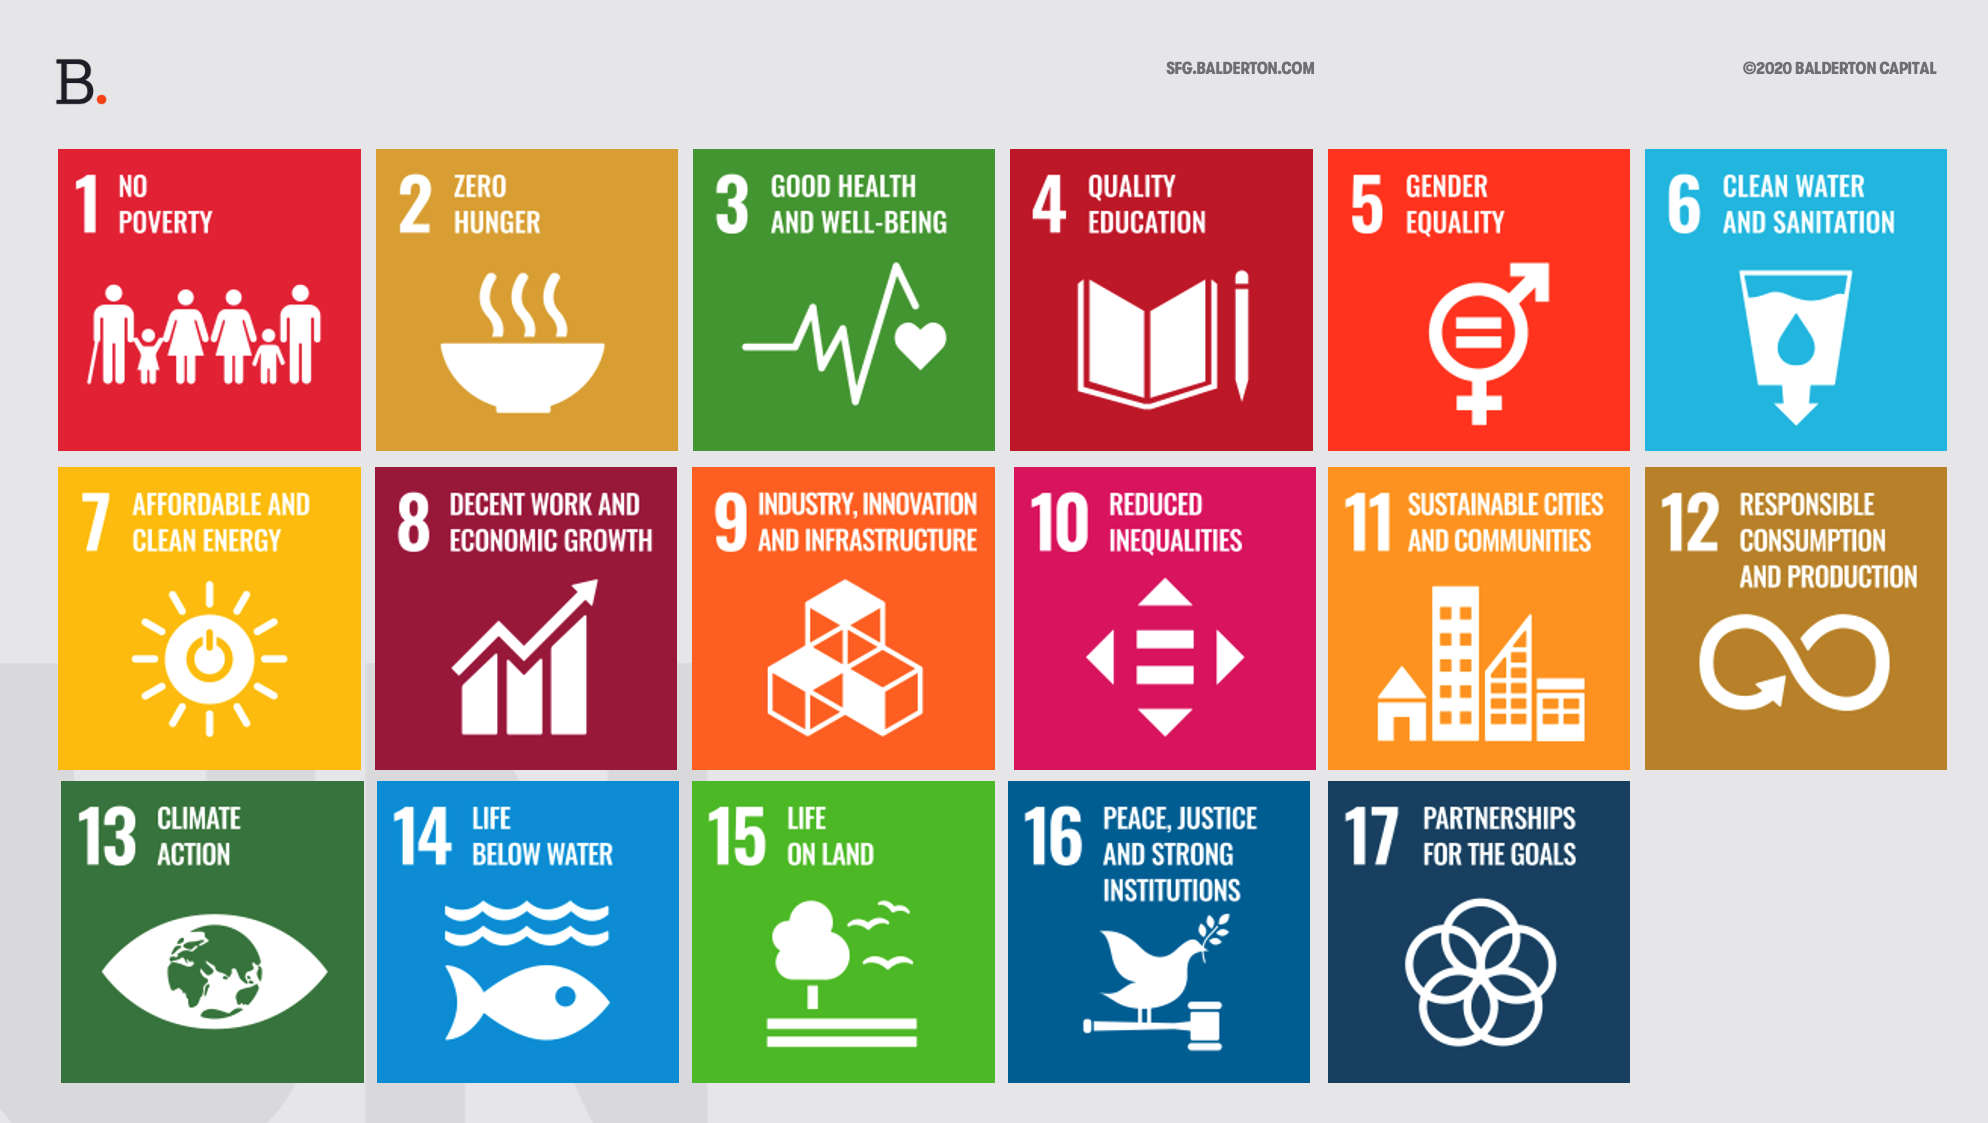 What Is Sustainable Development Goals